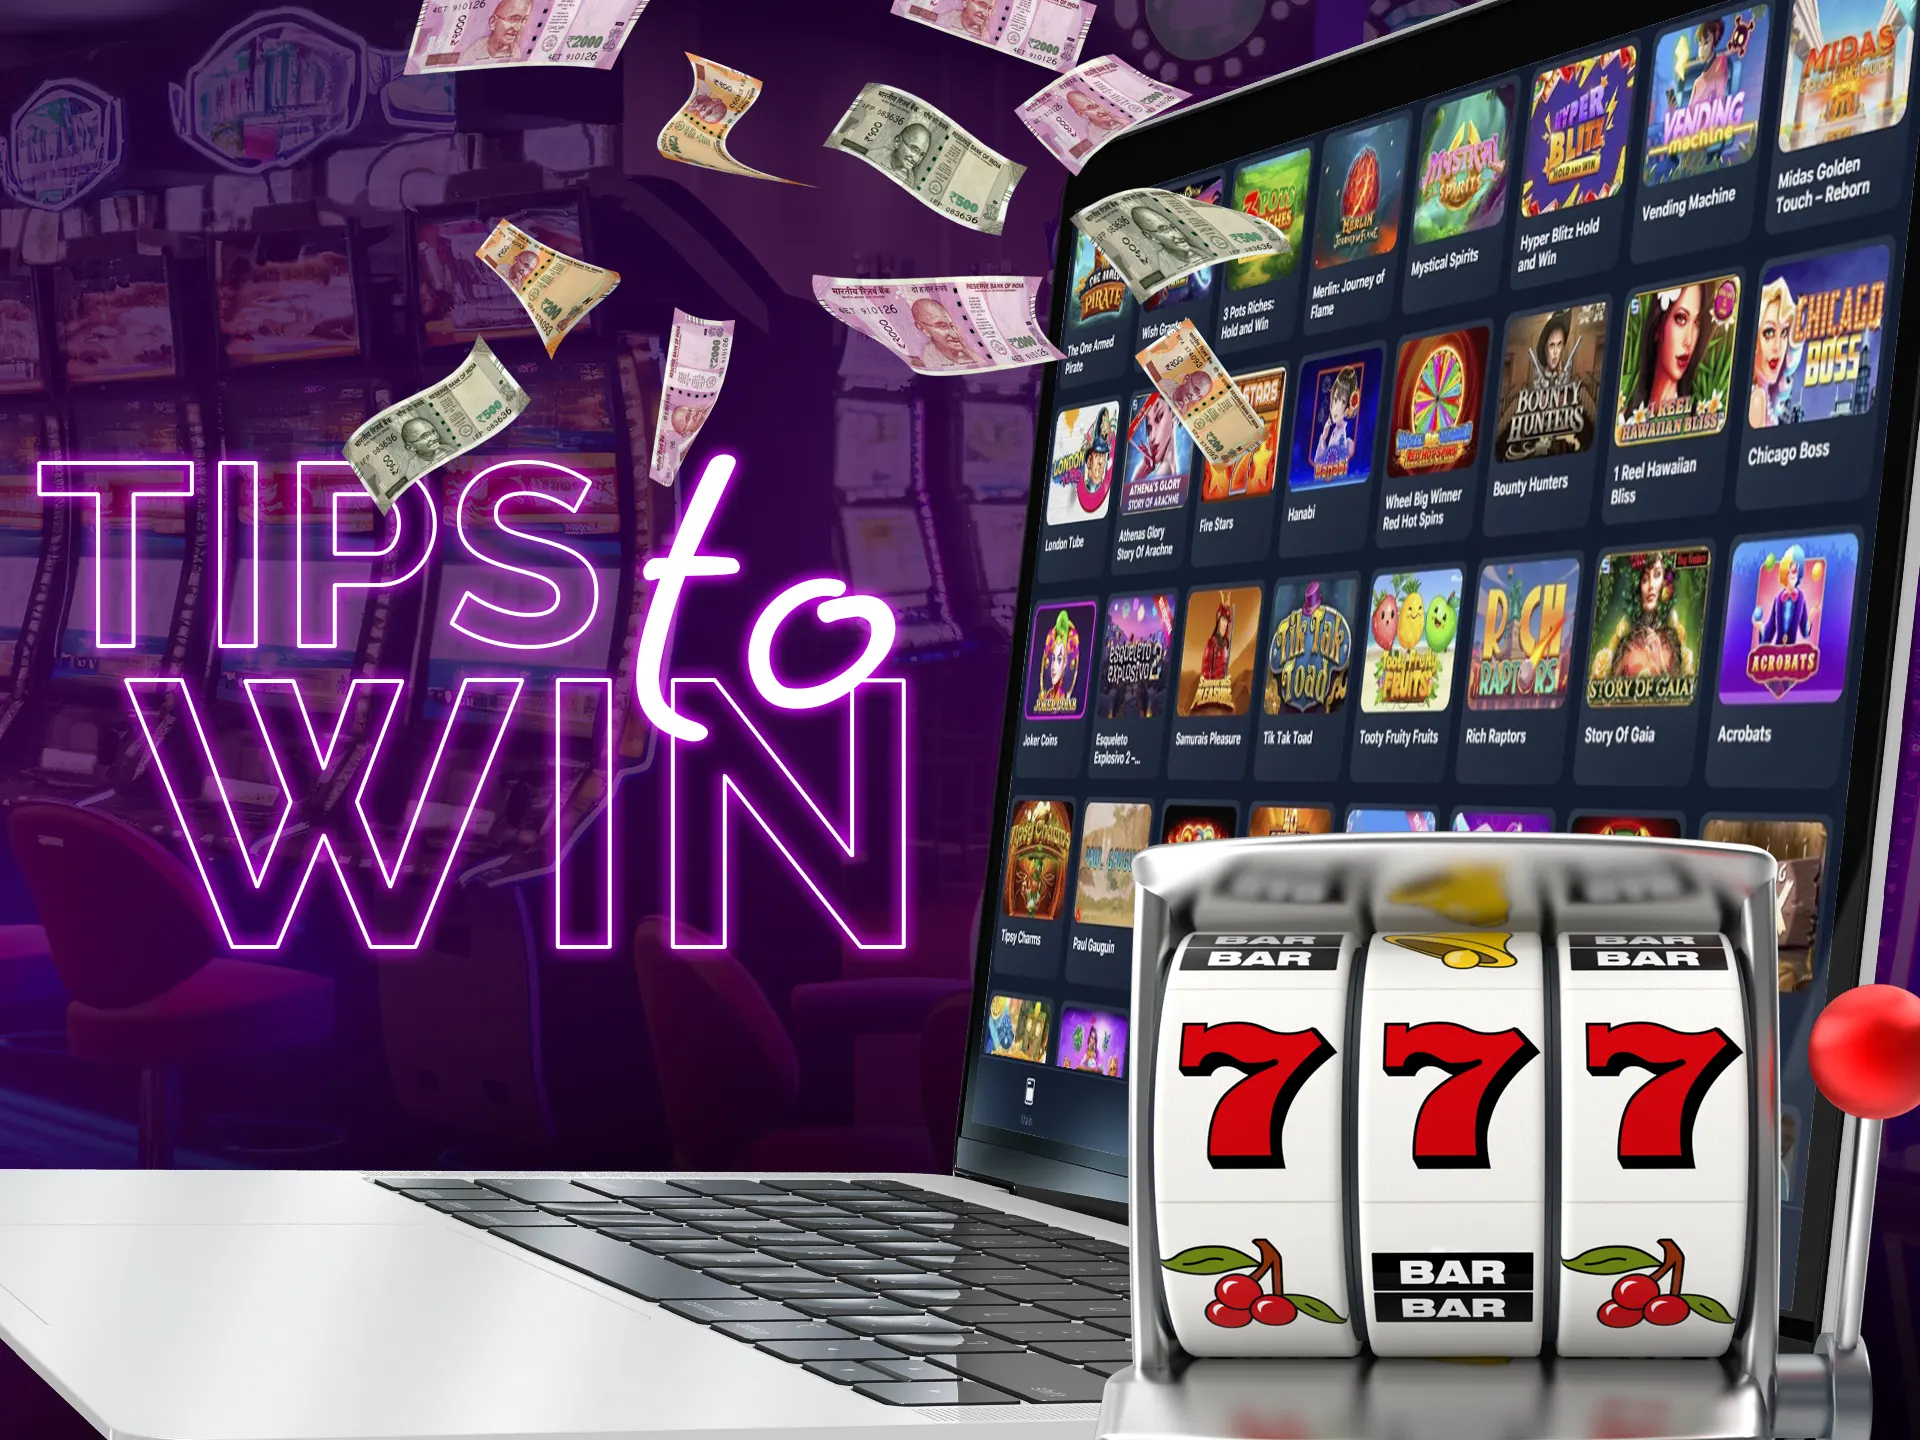 Winning in a video slot depends on luck.